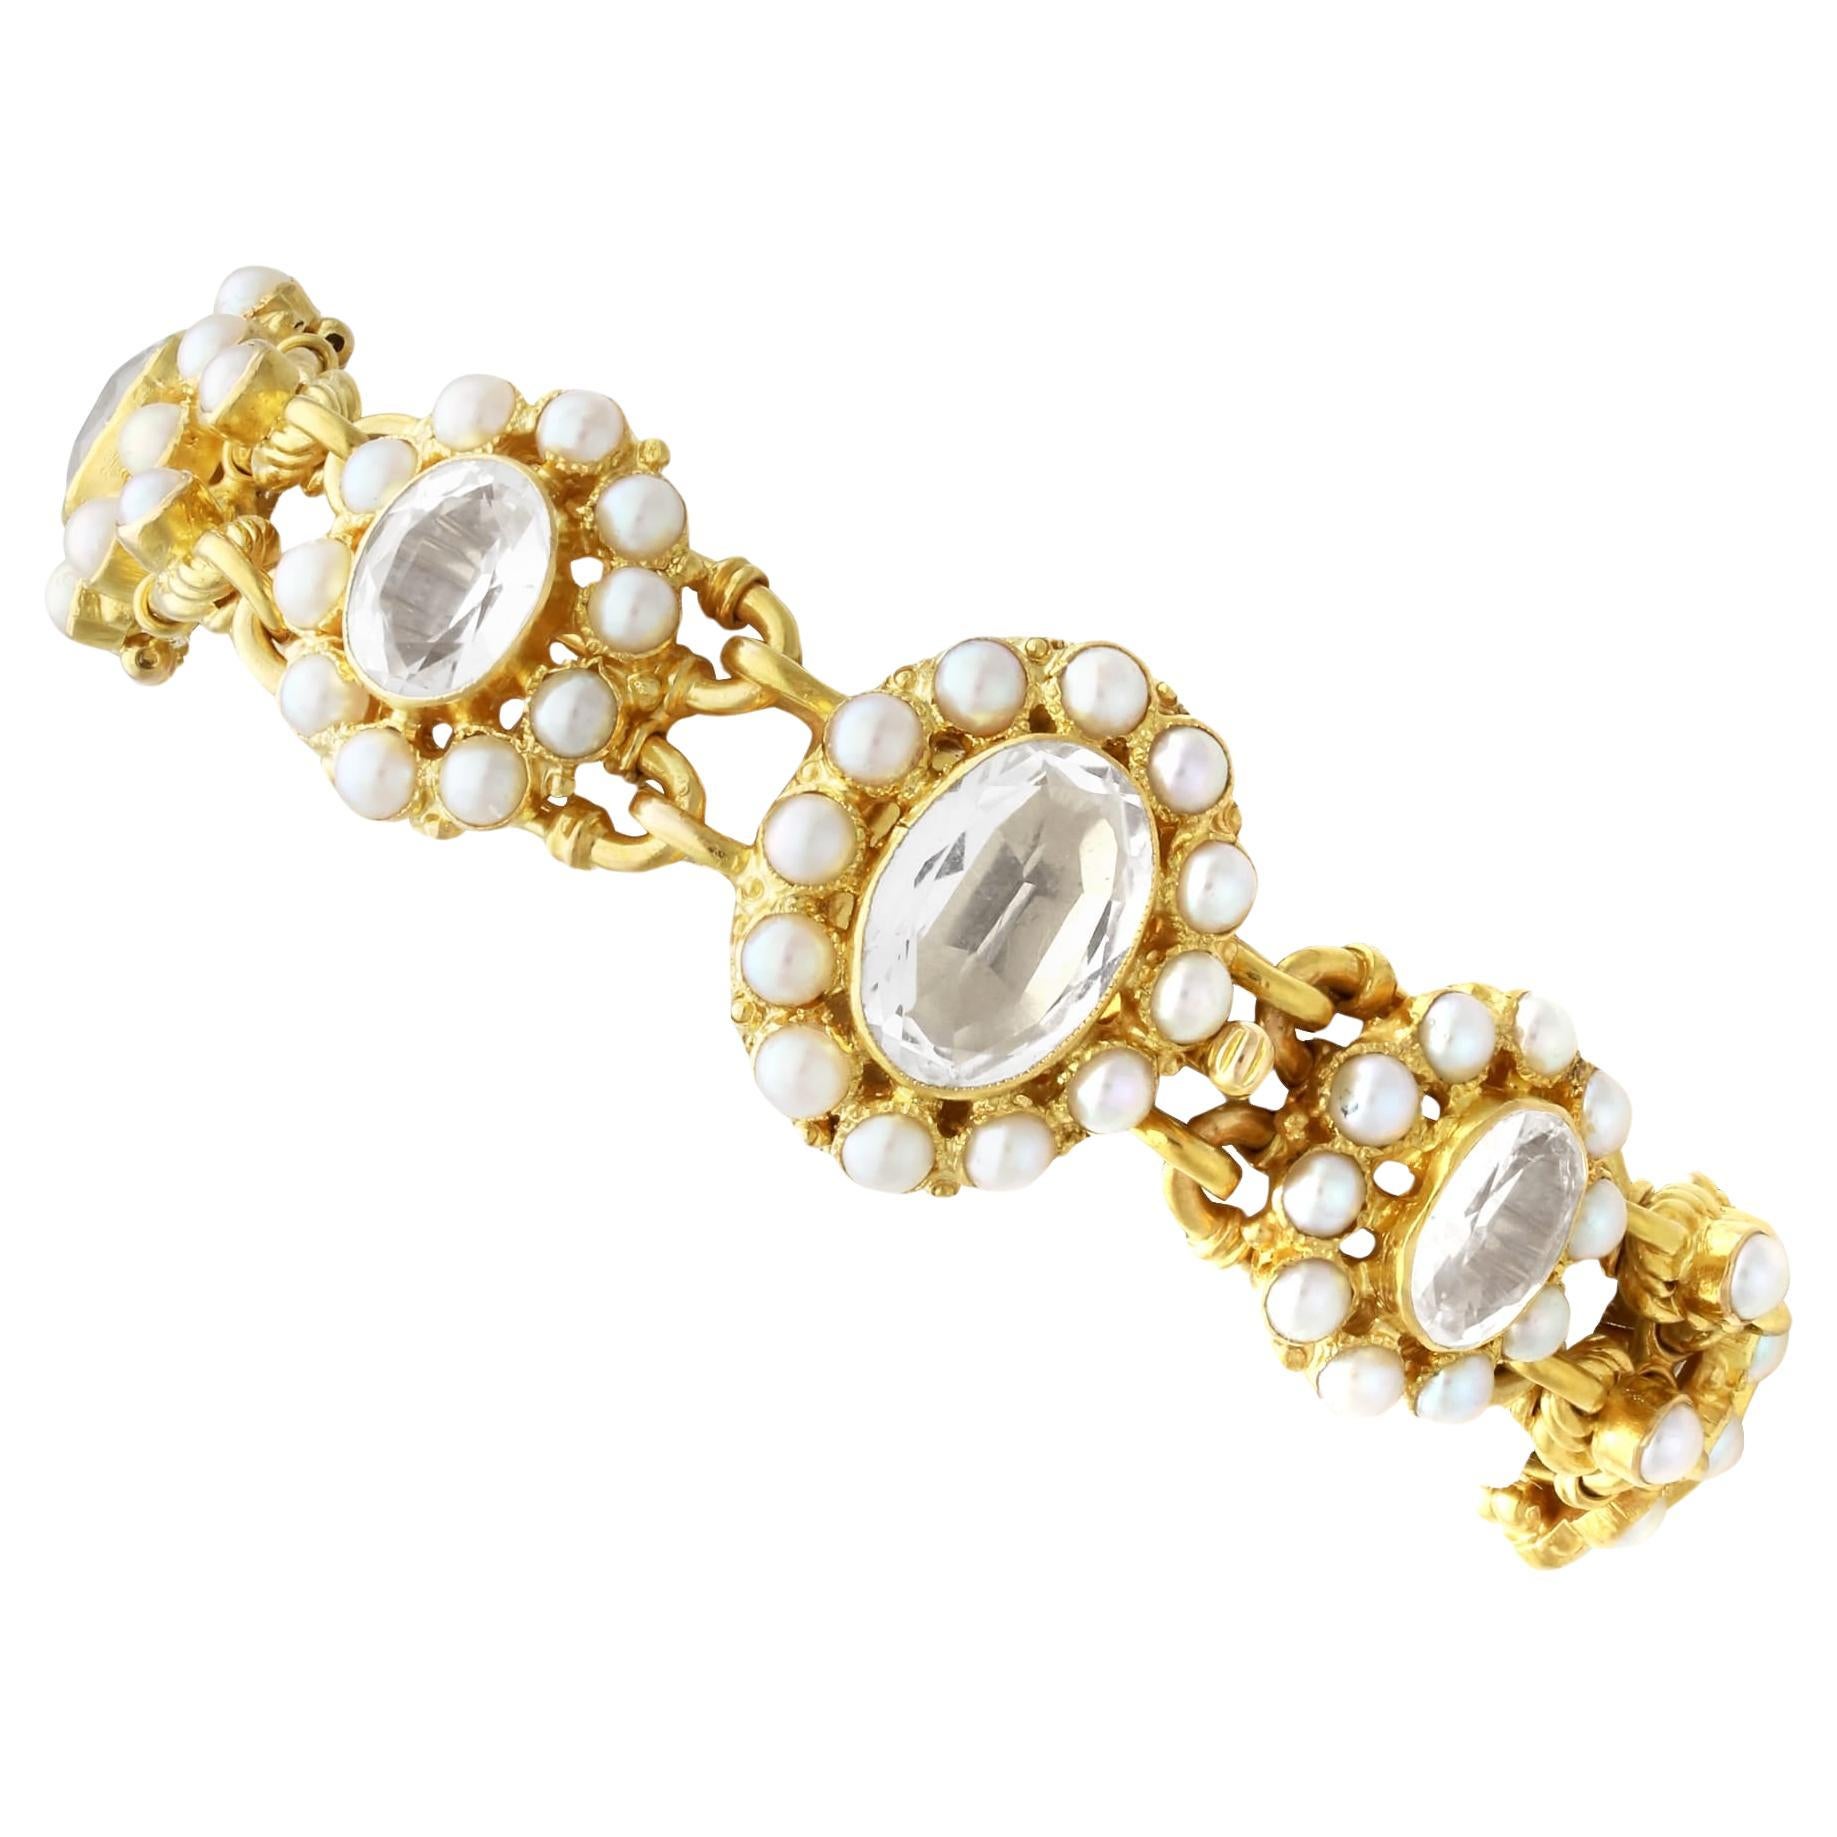 Victorian 9.50 Carat Rock Crystal and Natural Pearl 18K Yellow Gold Bracelet